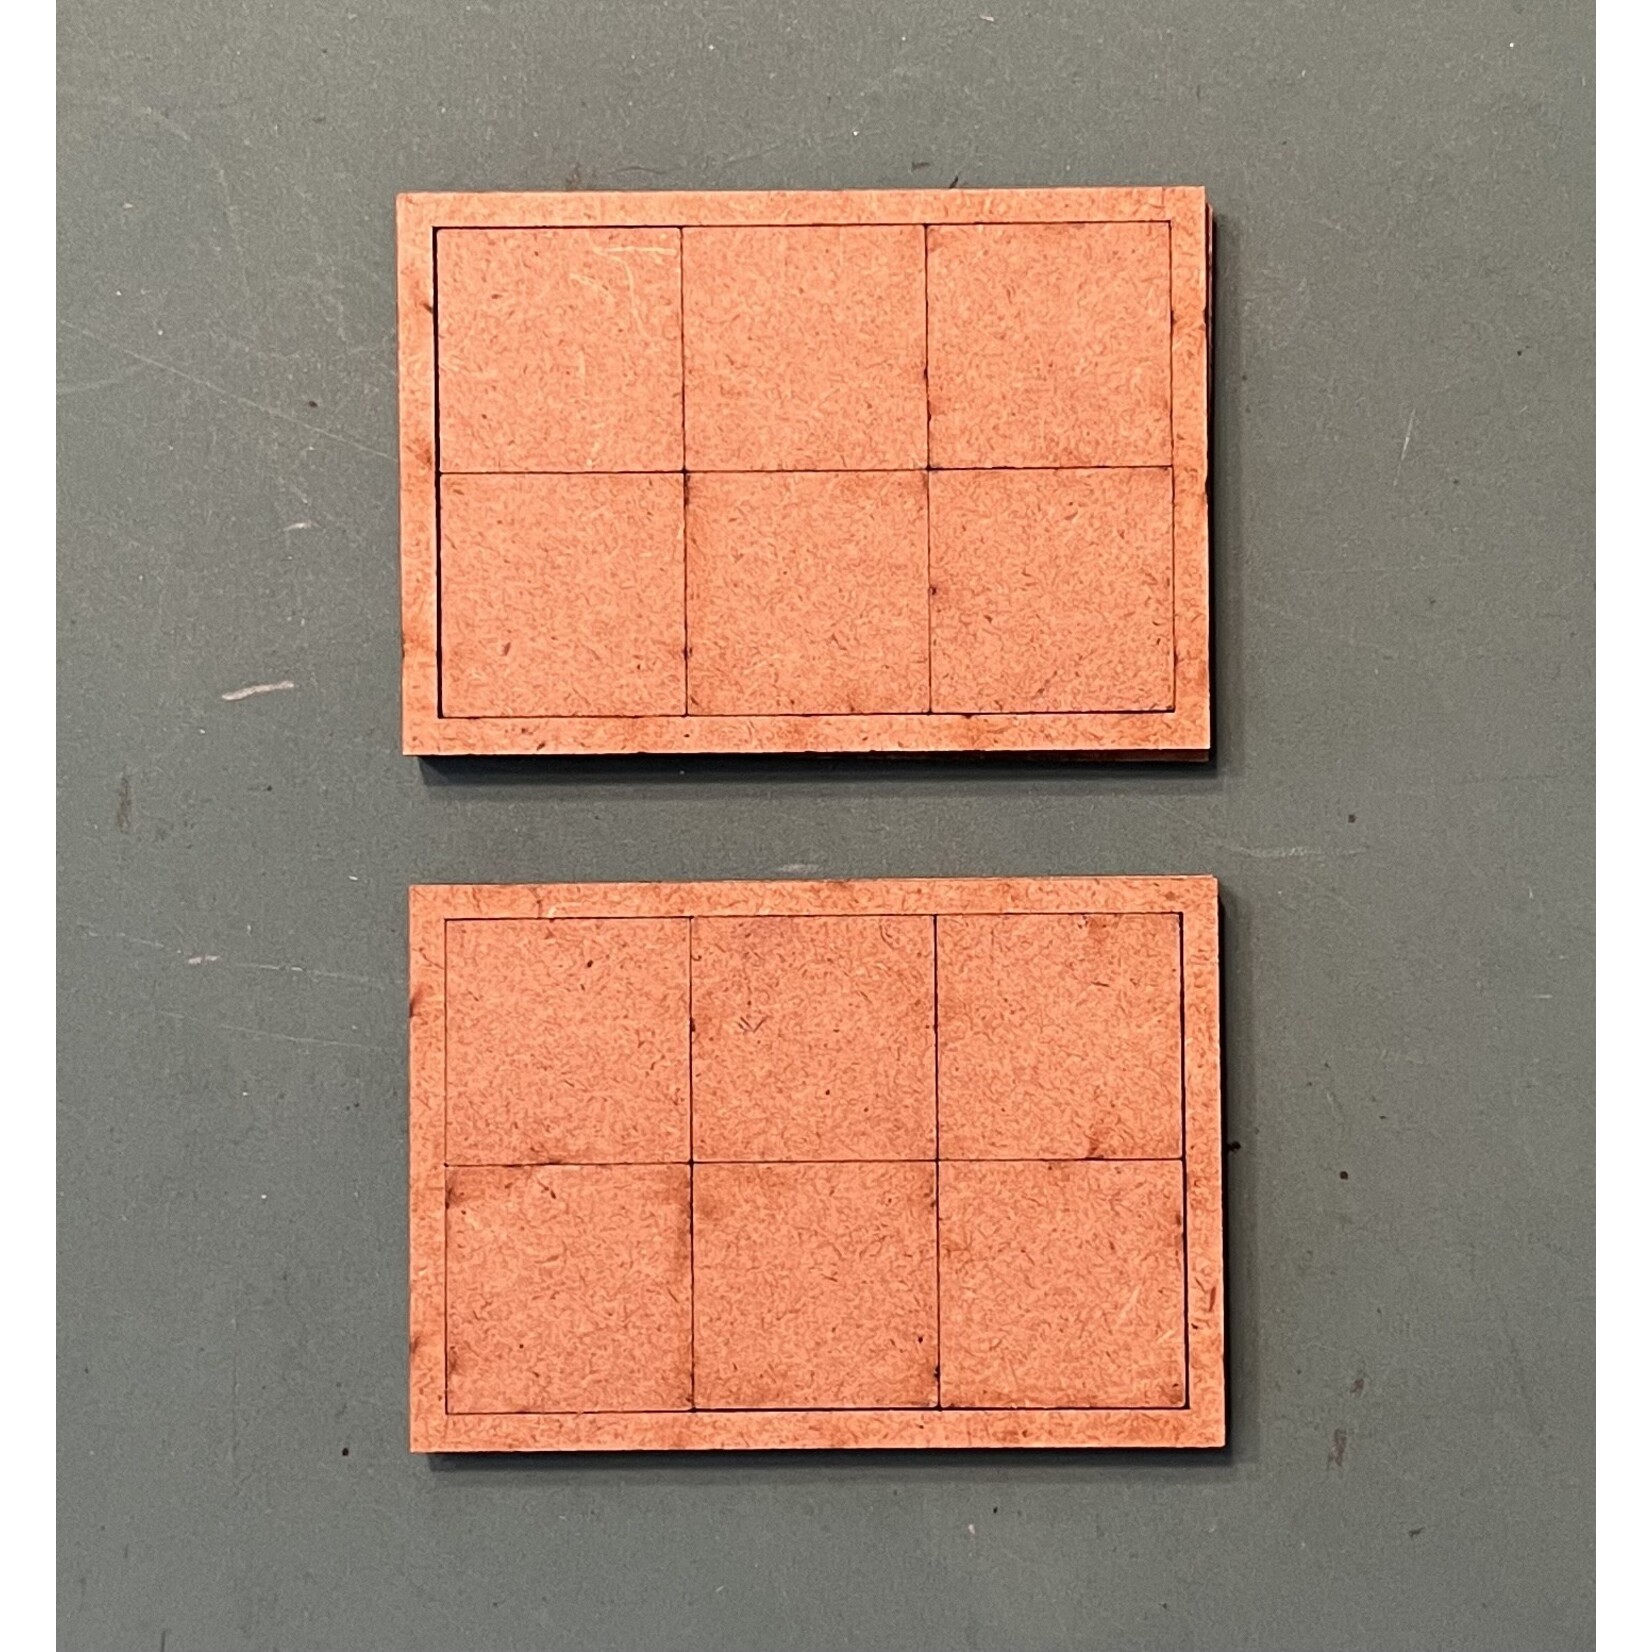 Phalanx Games & Sundry Pair of 20mm Square Trays (6 Figure) 3/3 Linear